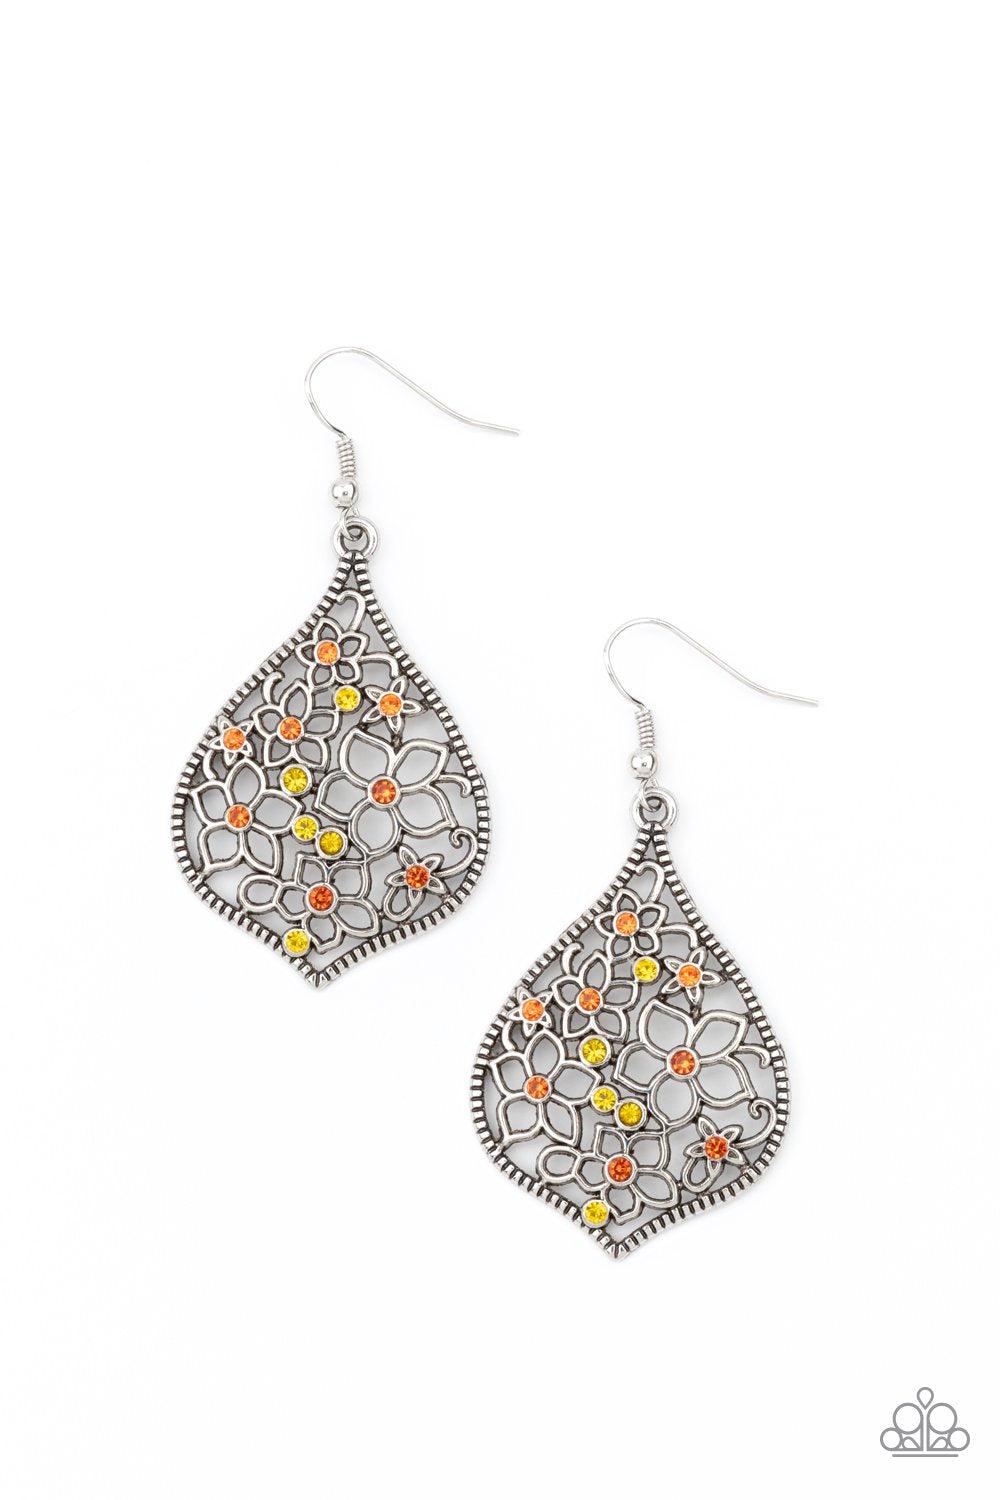 Full Out Florals Multi Yellow and Orange Rhinestone Earrings - Paparazzi Accessories- lightbox - CarasShop.com - $5 Jewelry by Cara Jewels